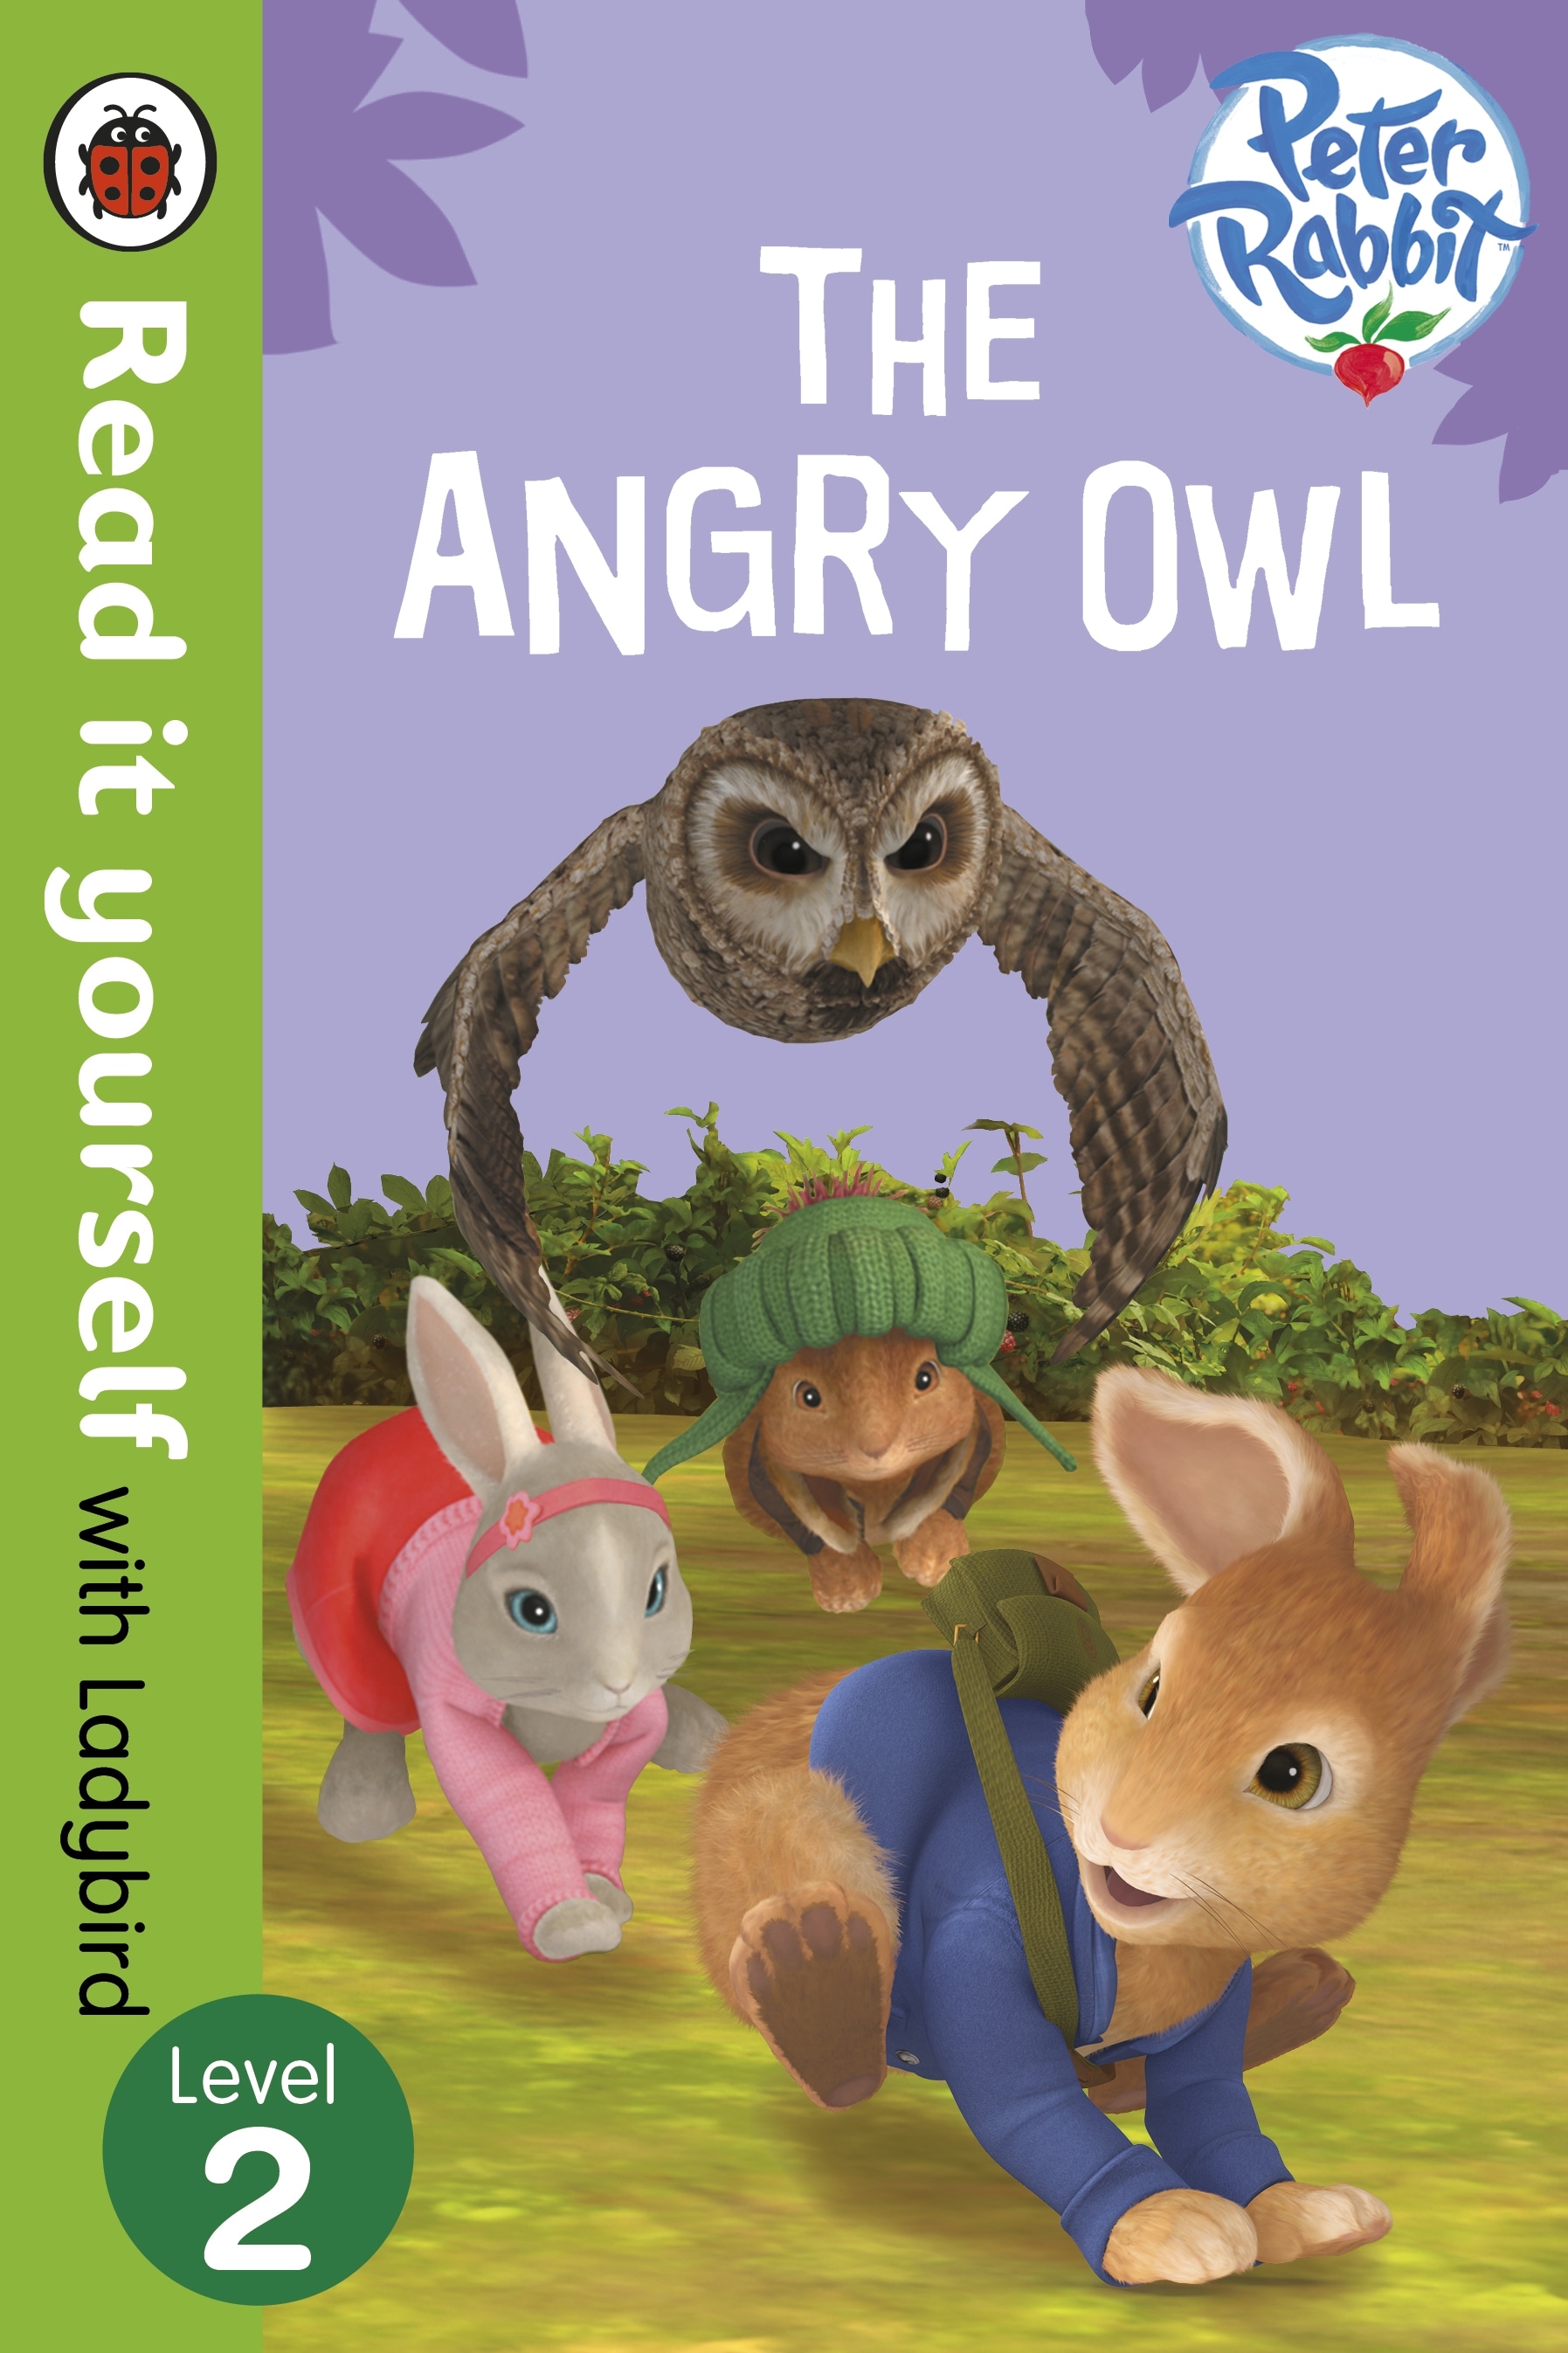 Peter Rabbit: The Angry Owl - Read it yourself with Ladybird